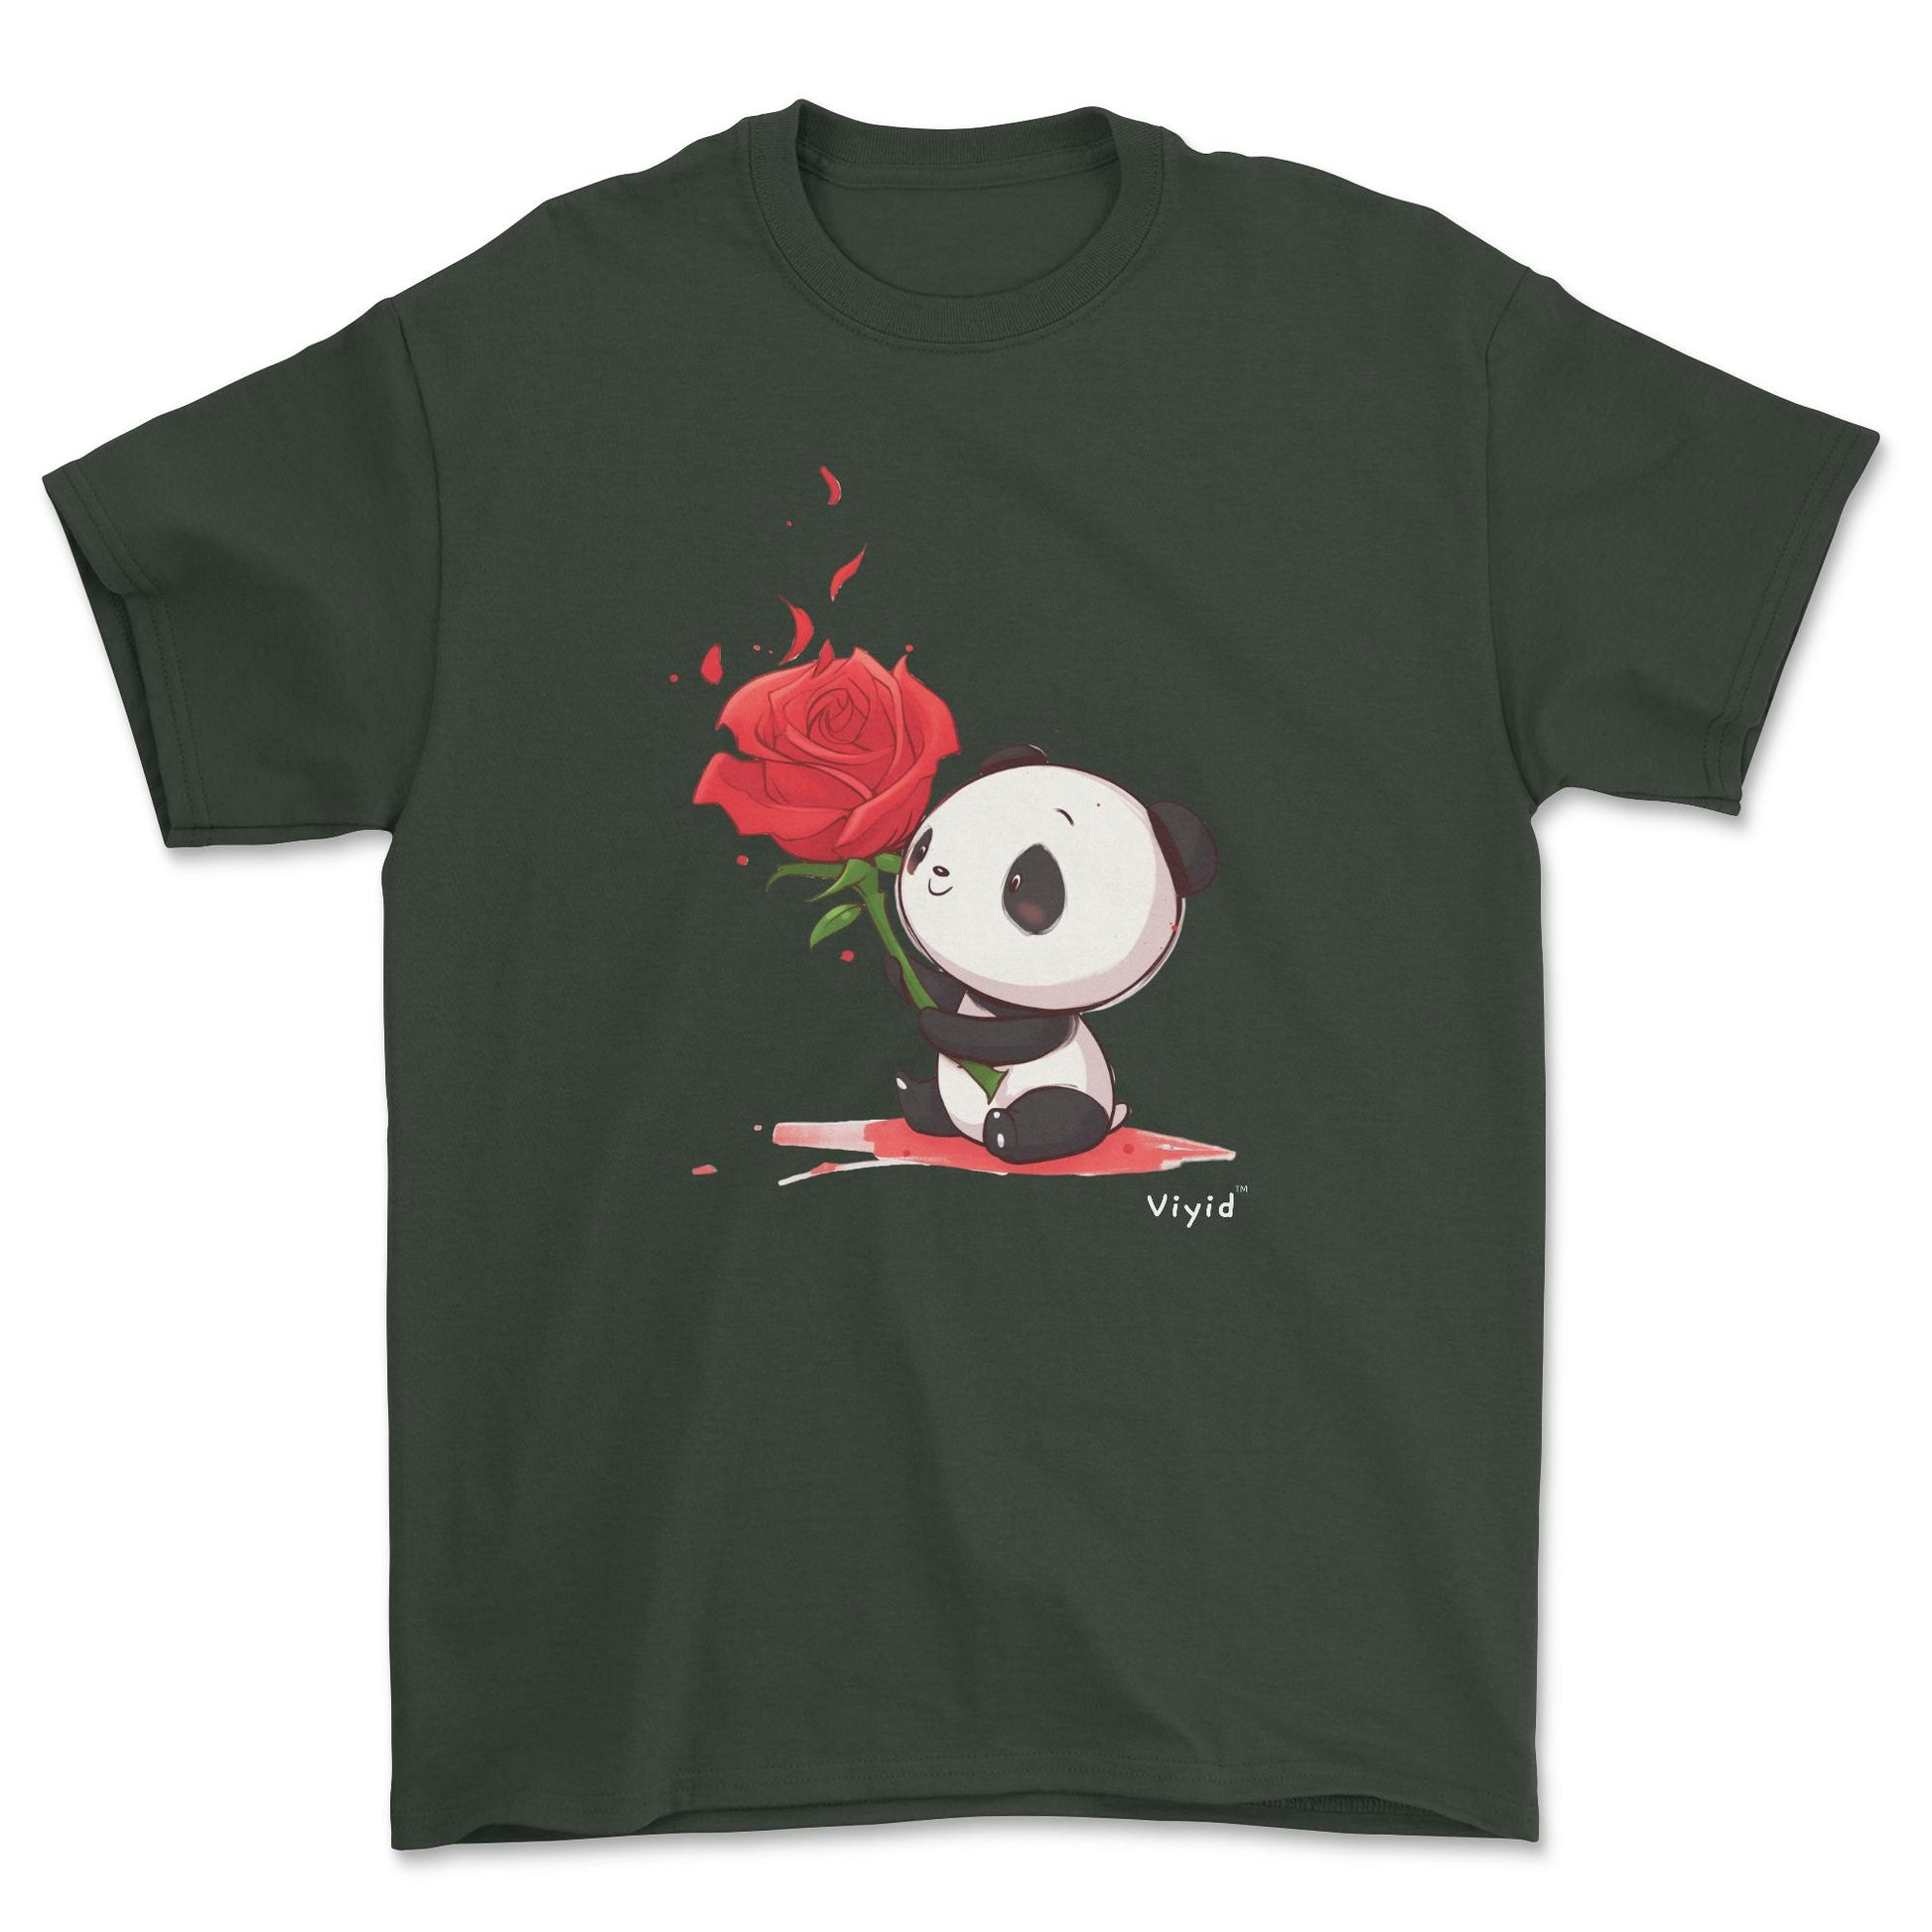 rose holding panda youth t-shirt forest green